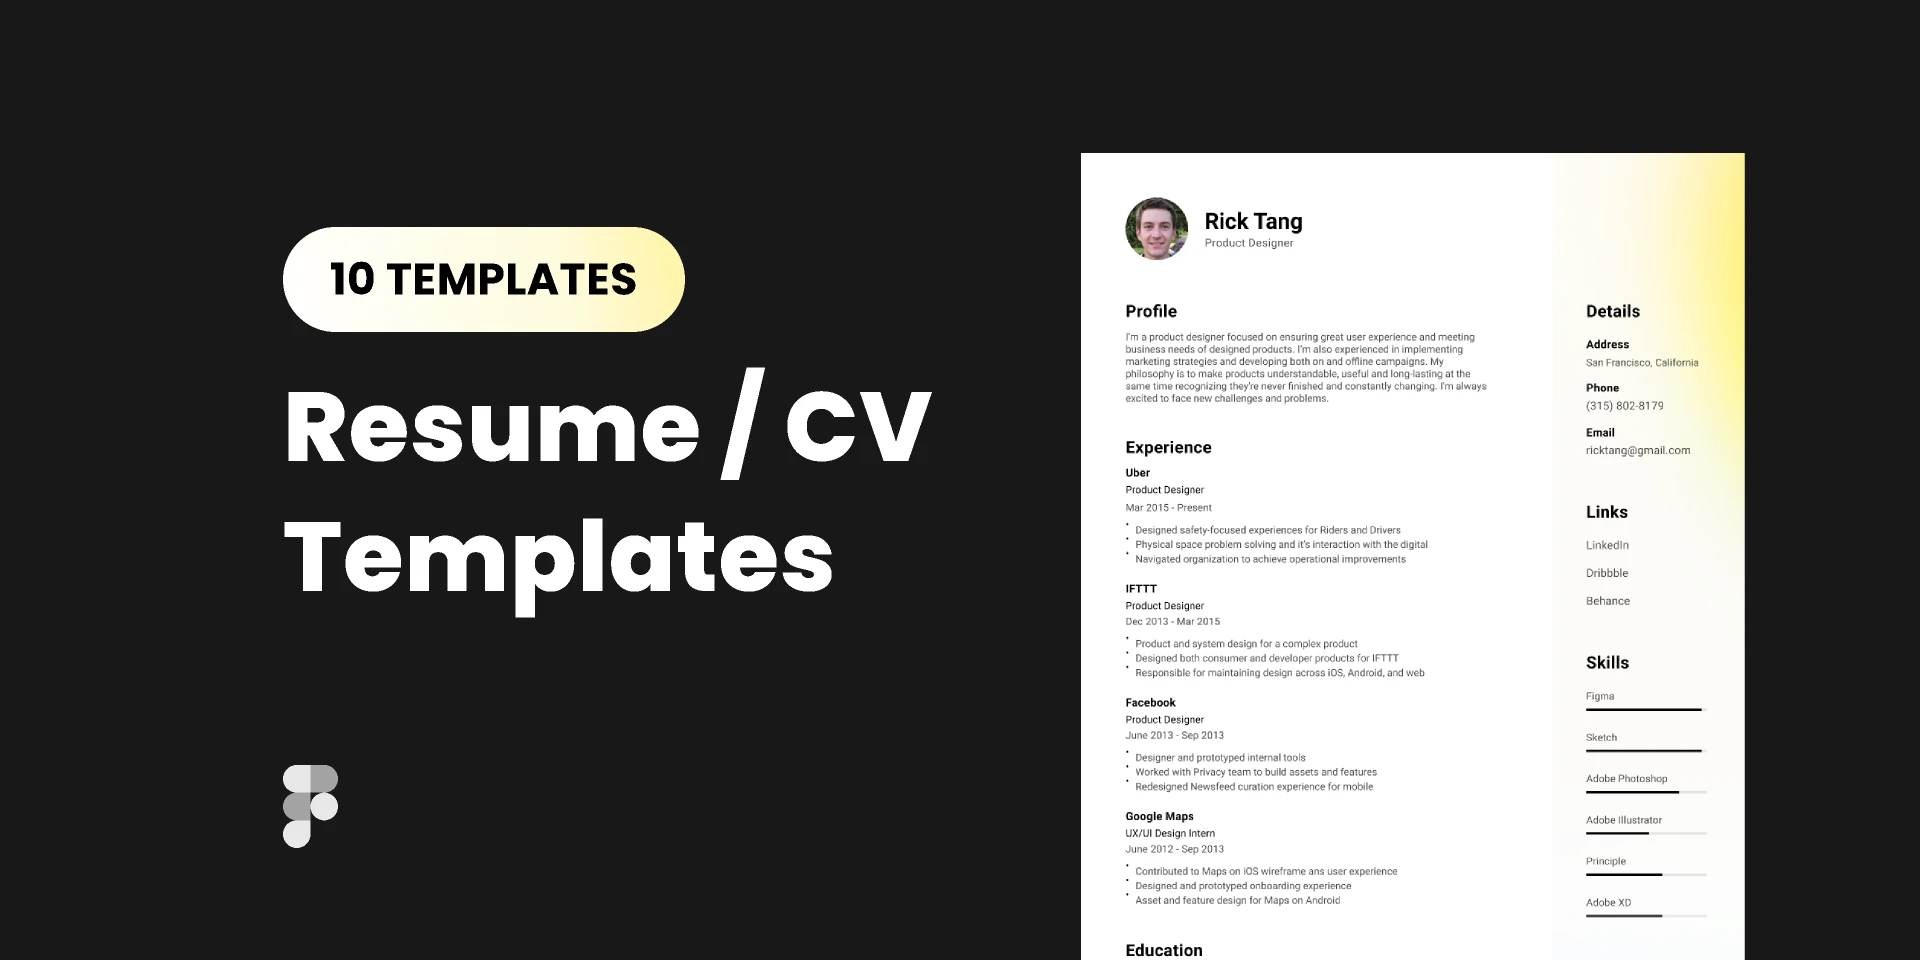 Resume / CV Templates for Figma and Adobe XD